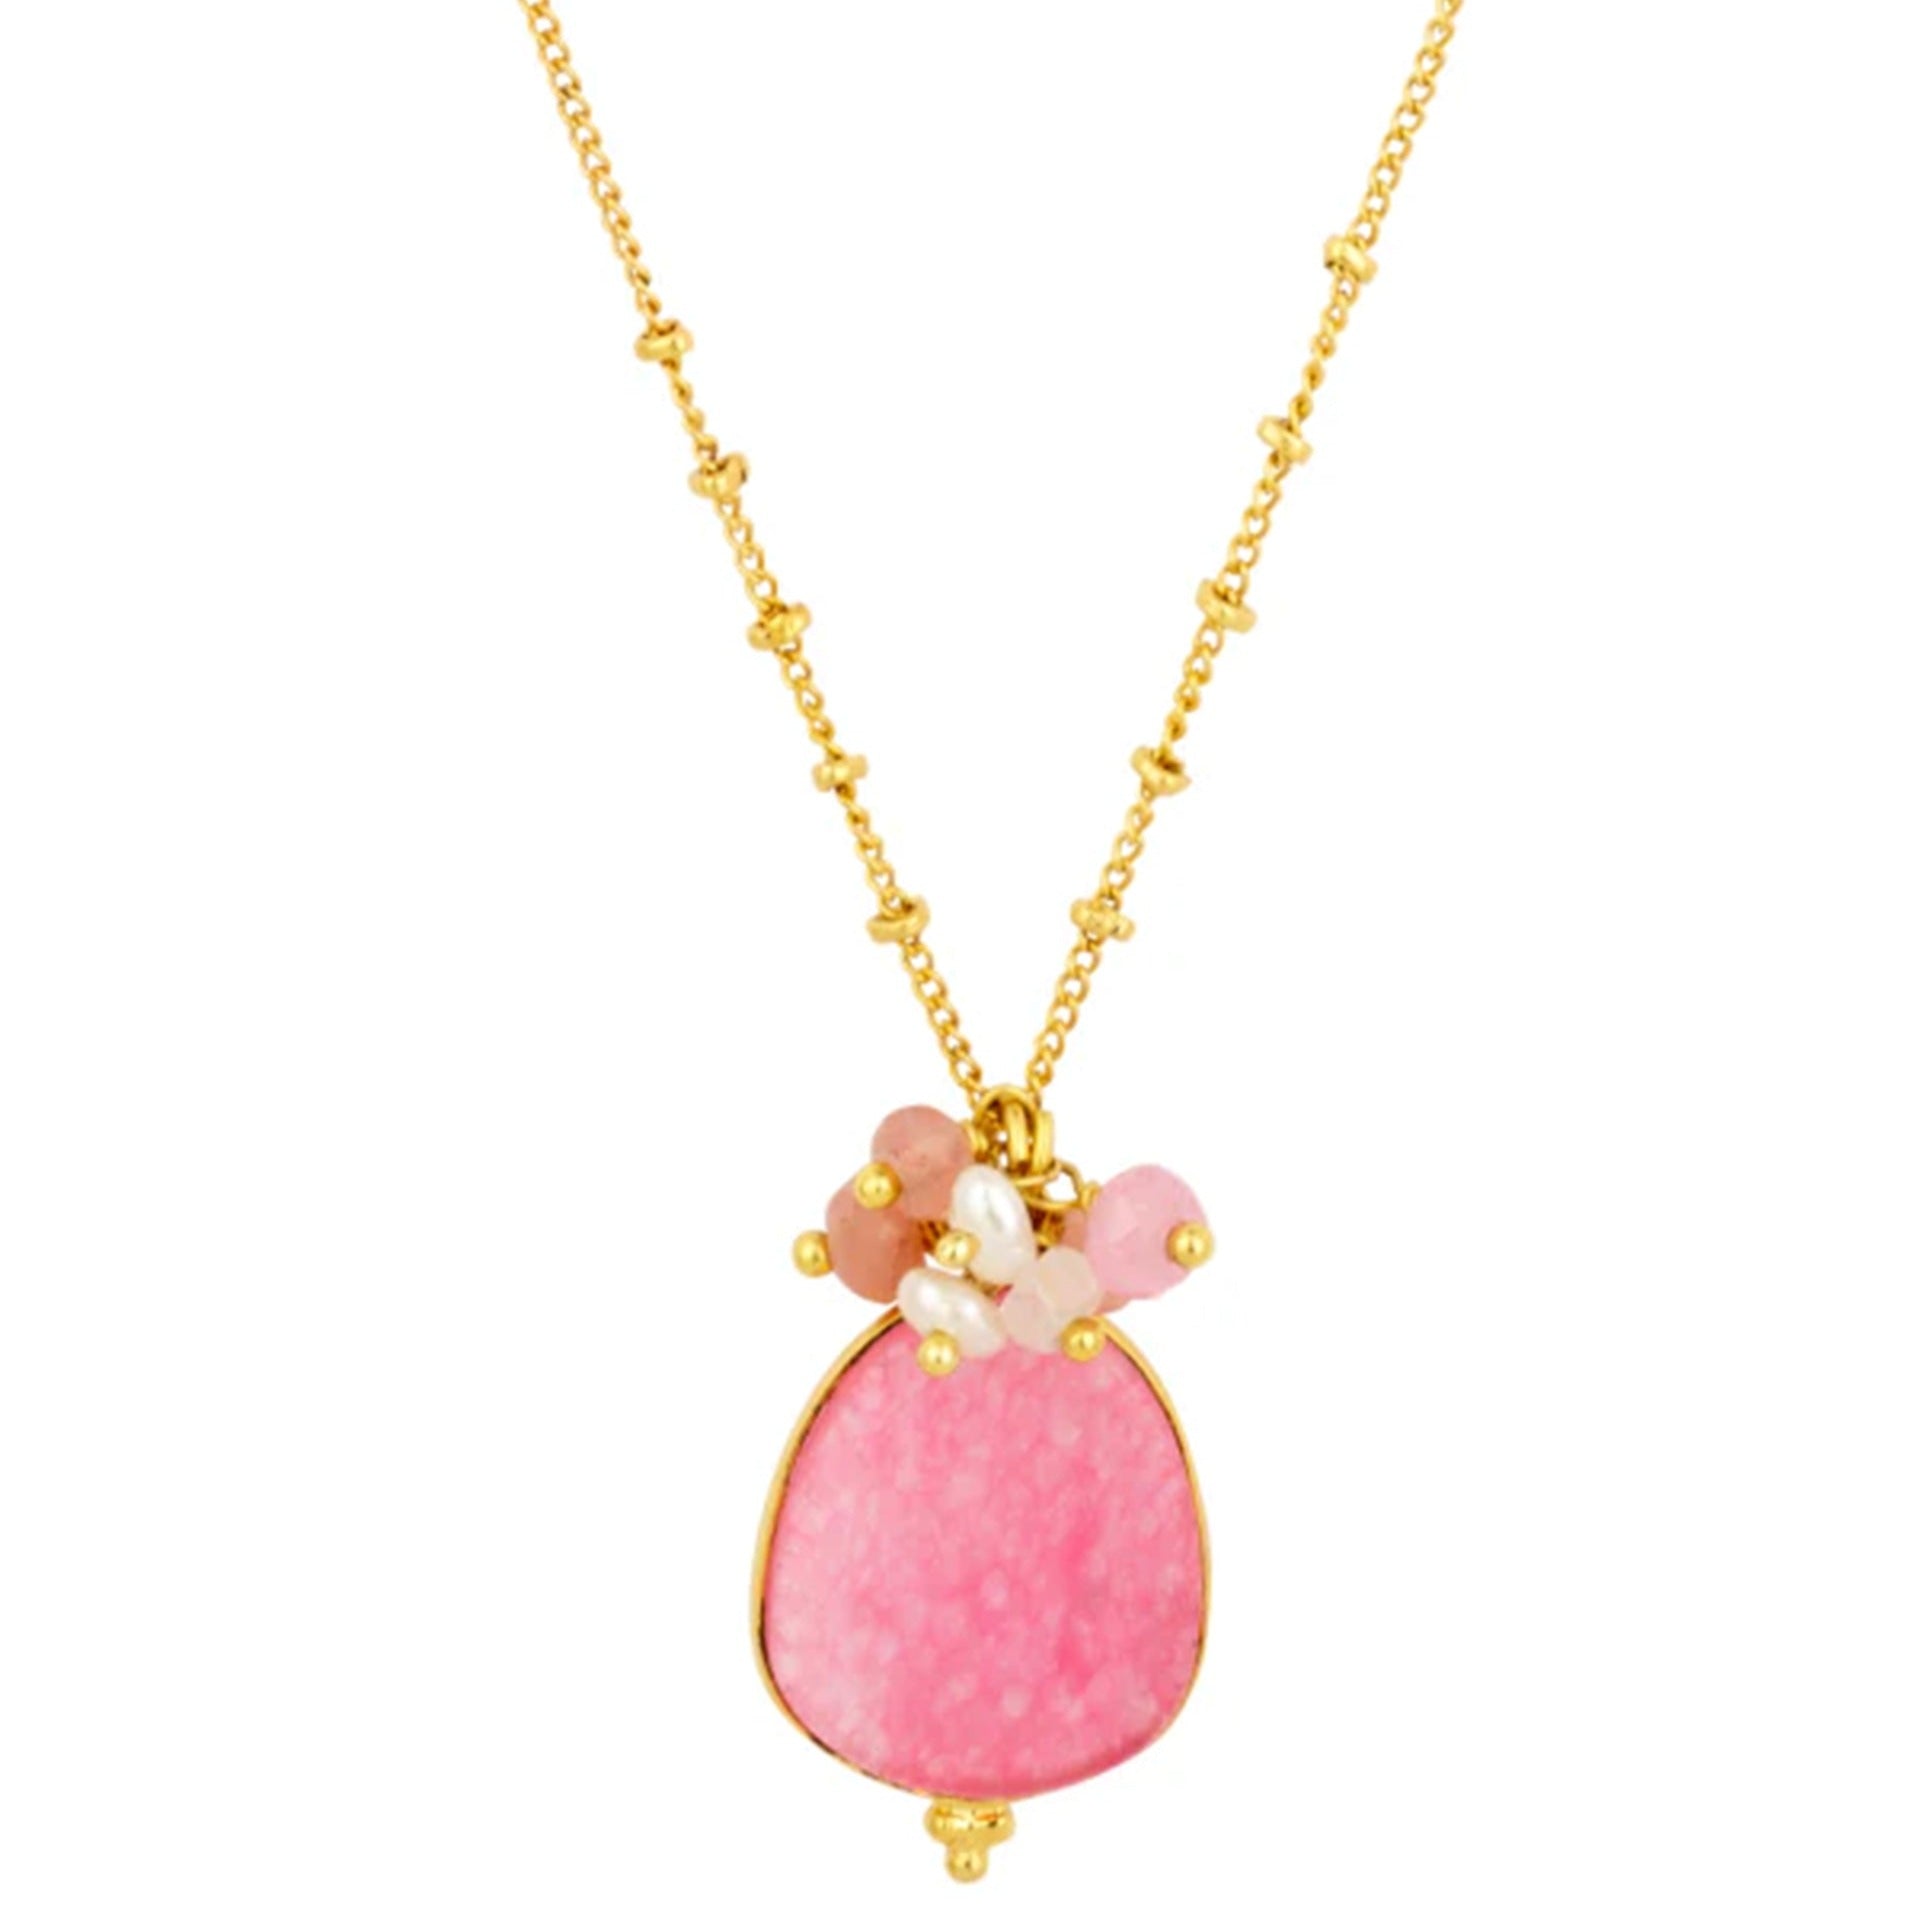 Willow Necklace - Pink